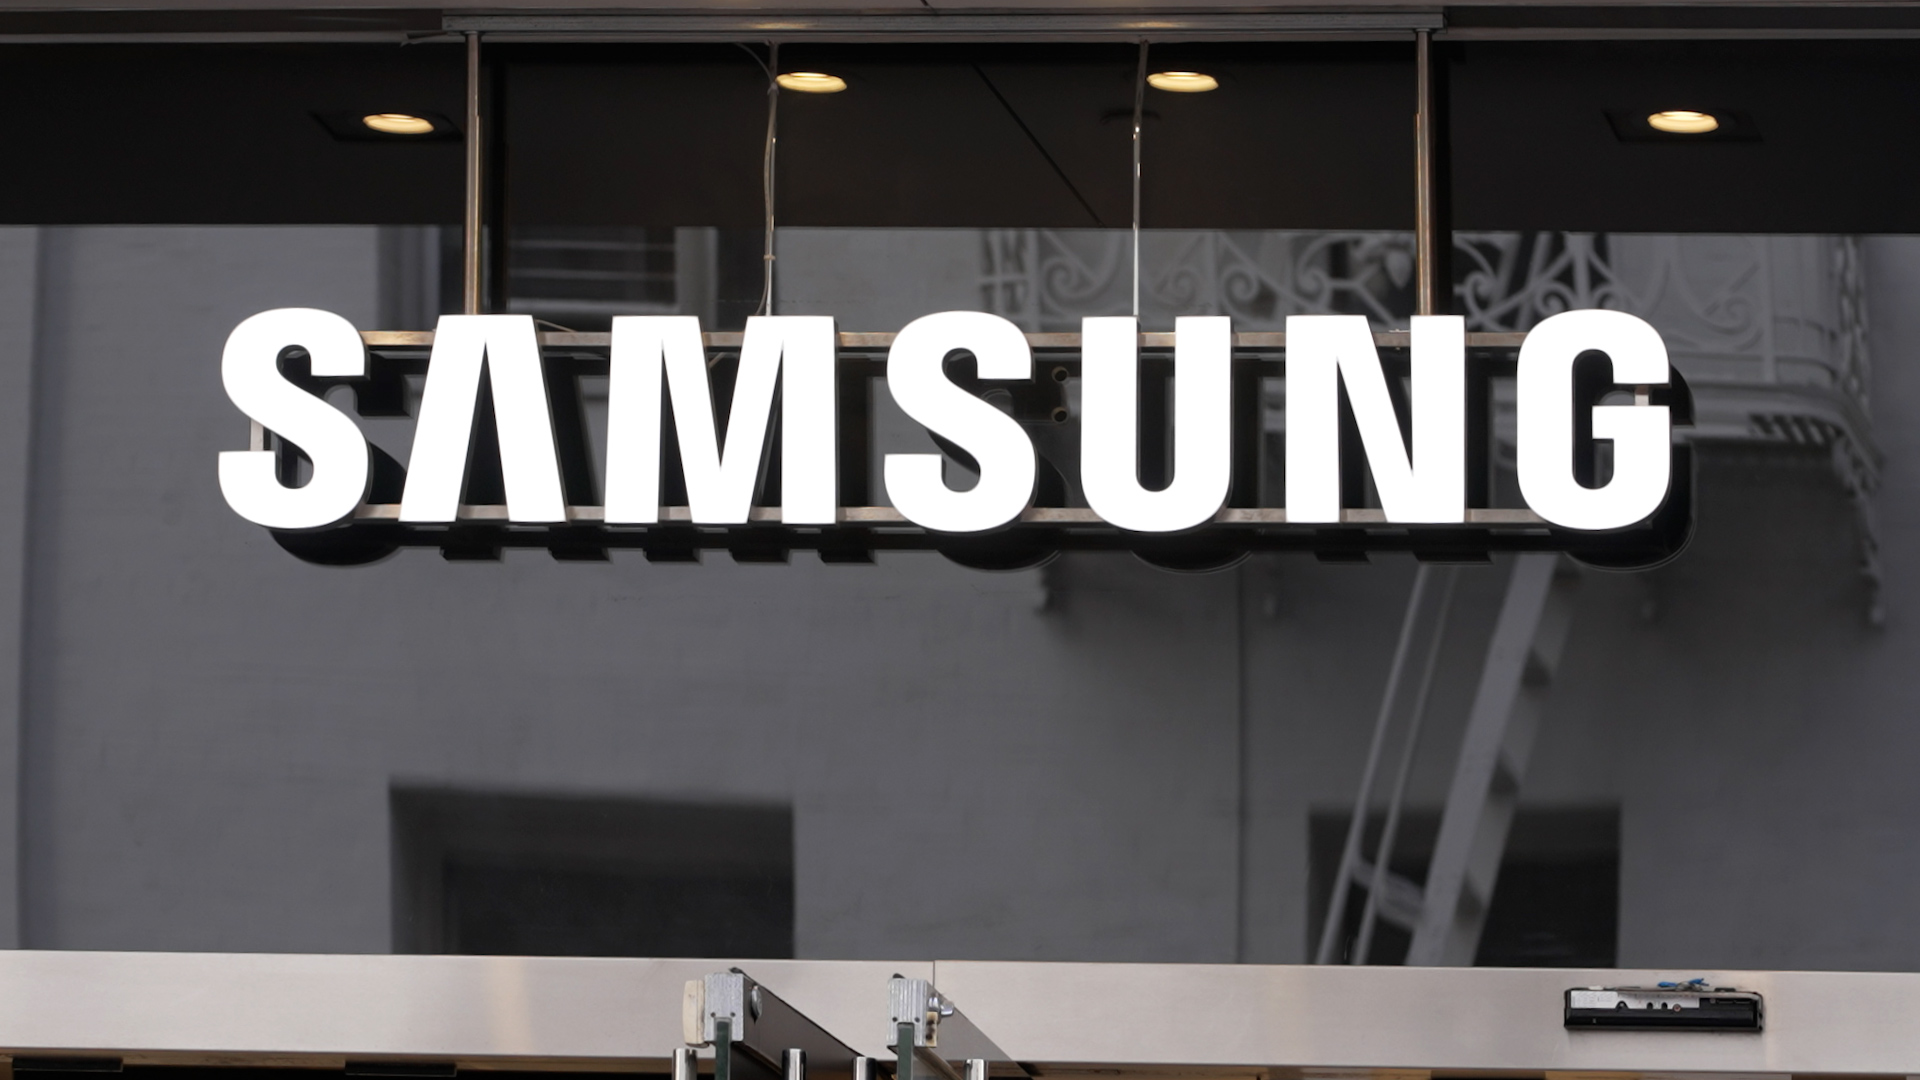 Samsung Unpacked Event Recap: Every Announcement You May Have